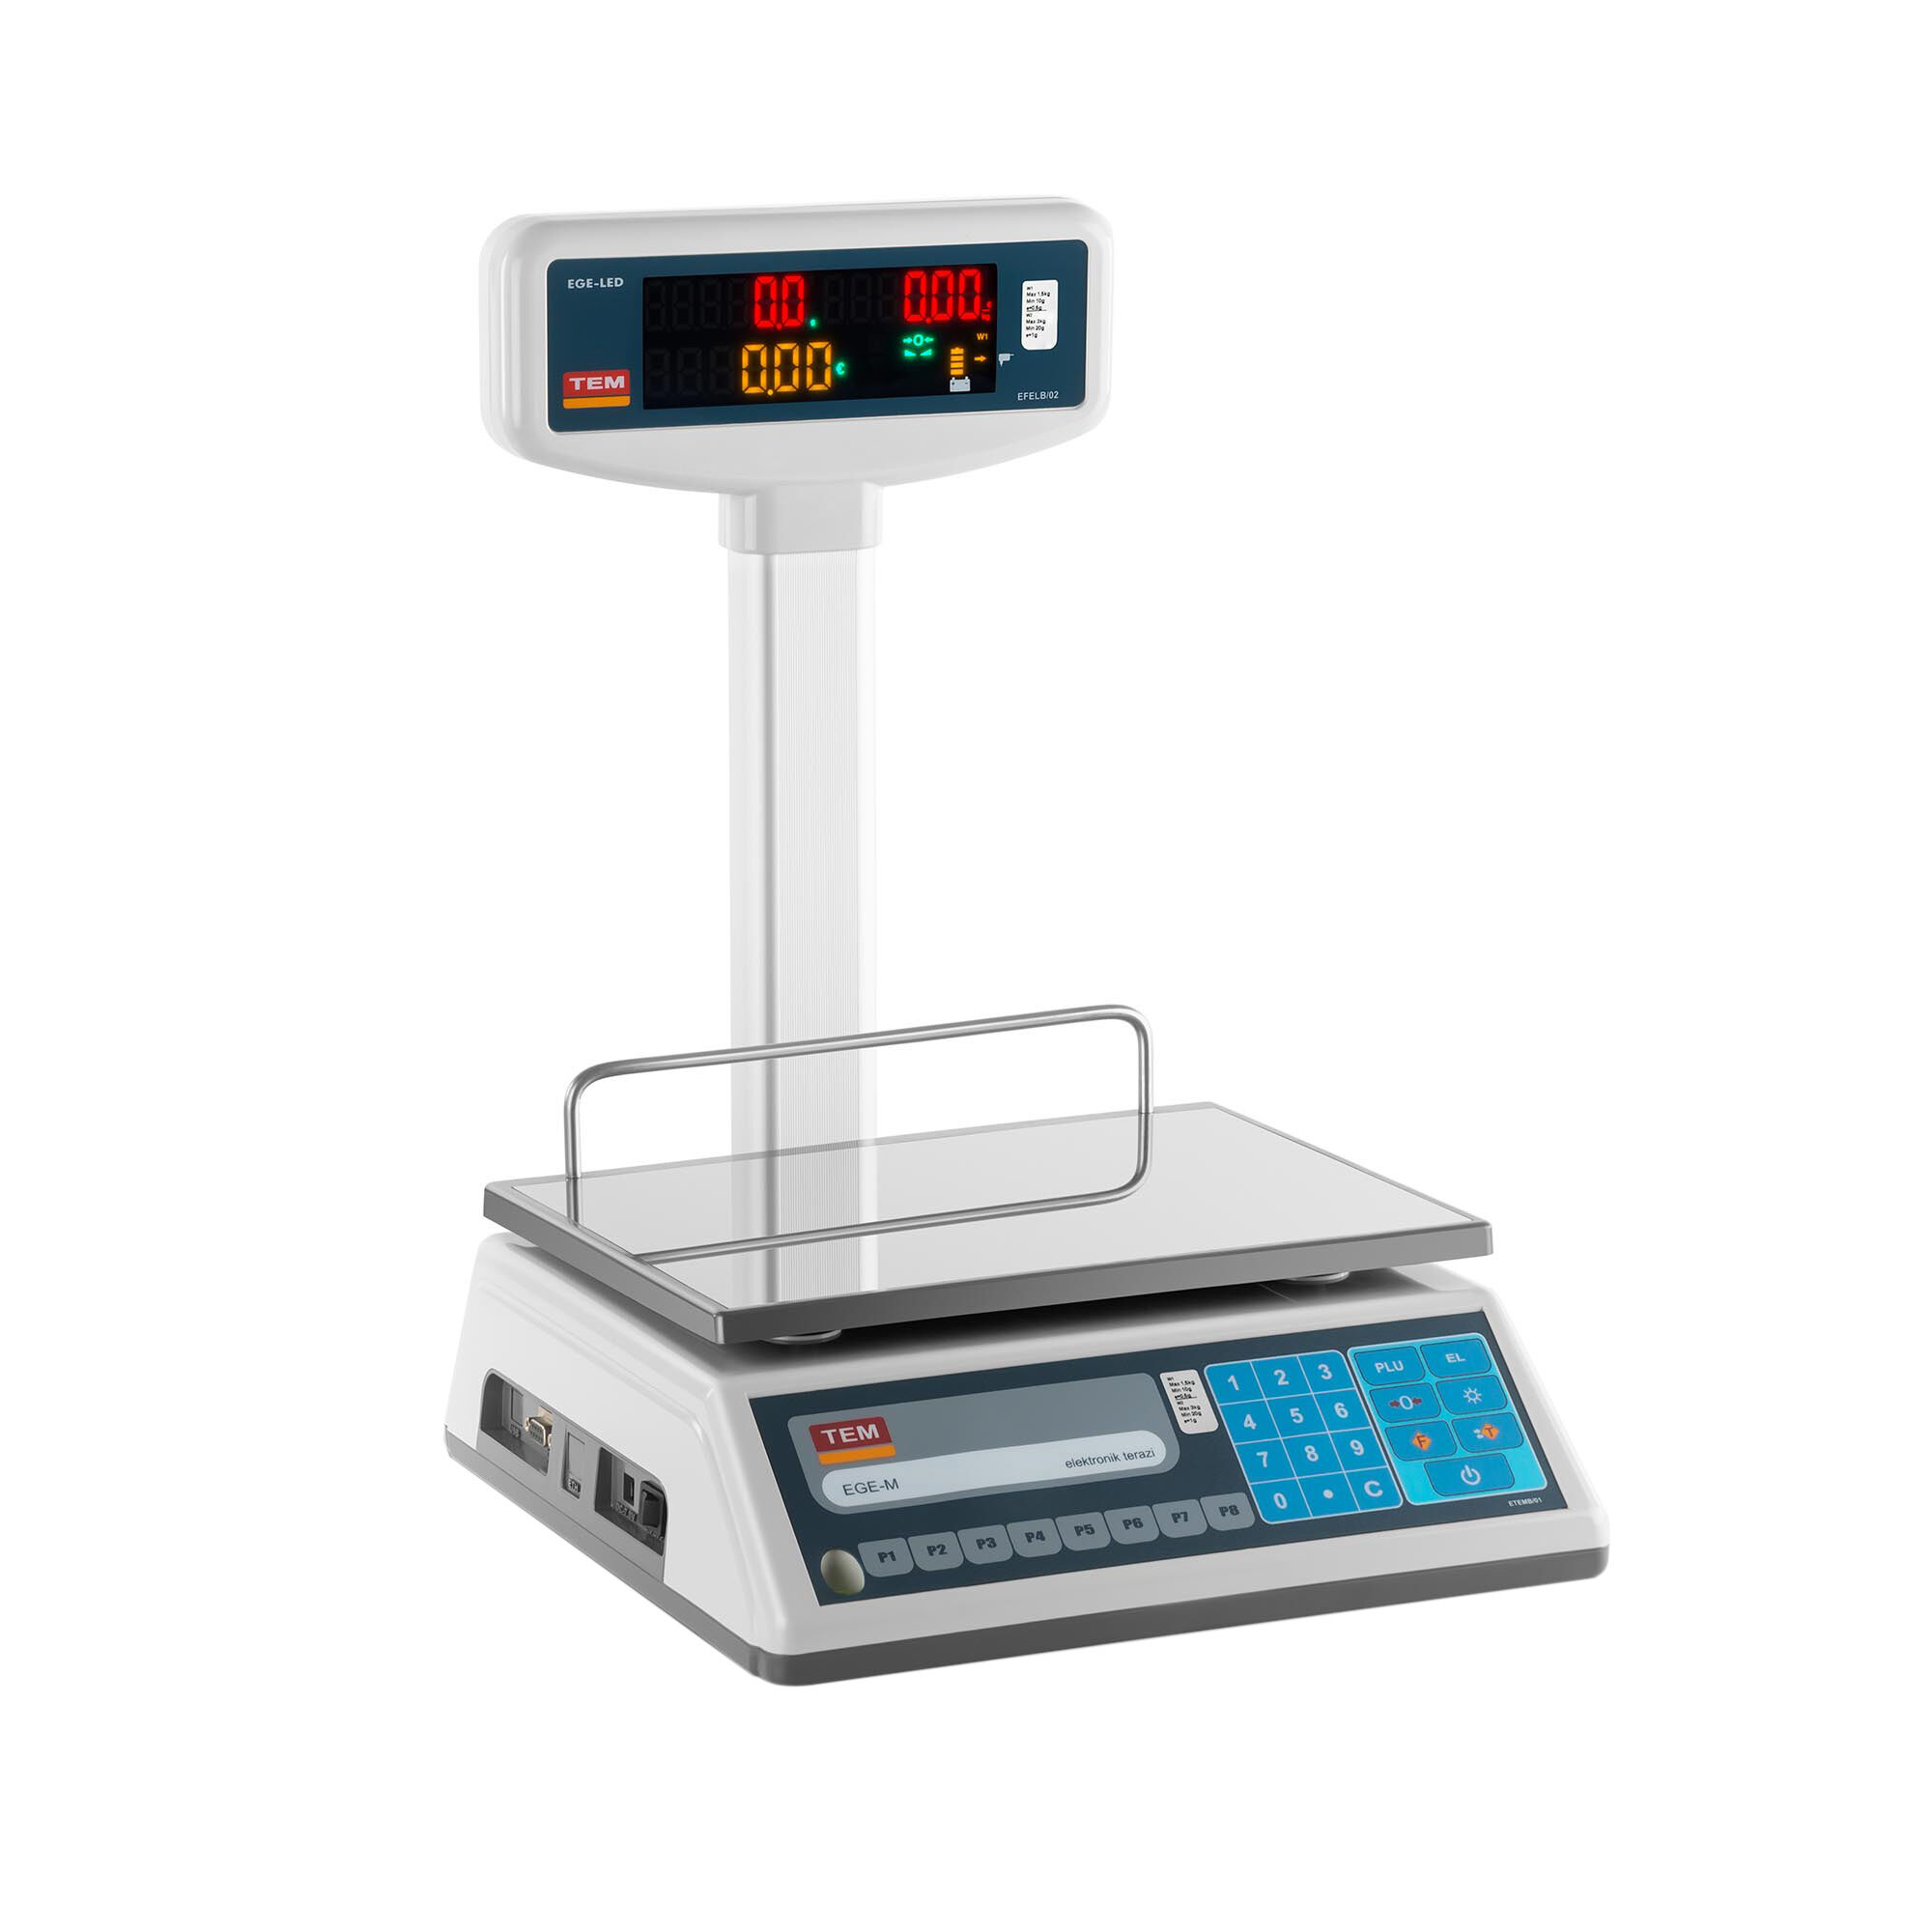 TEM Price Scale with LED display - calibrated - 1.5 kg / 0.5 g - 3 kg / 1 g